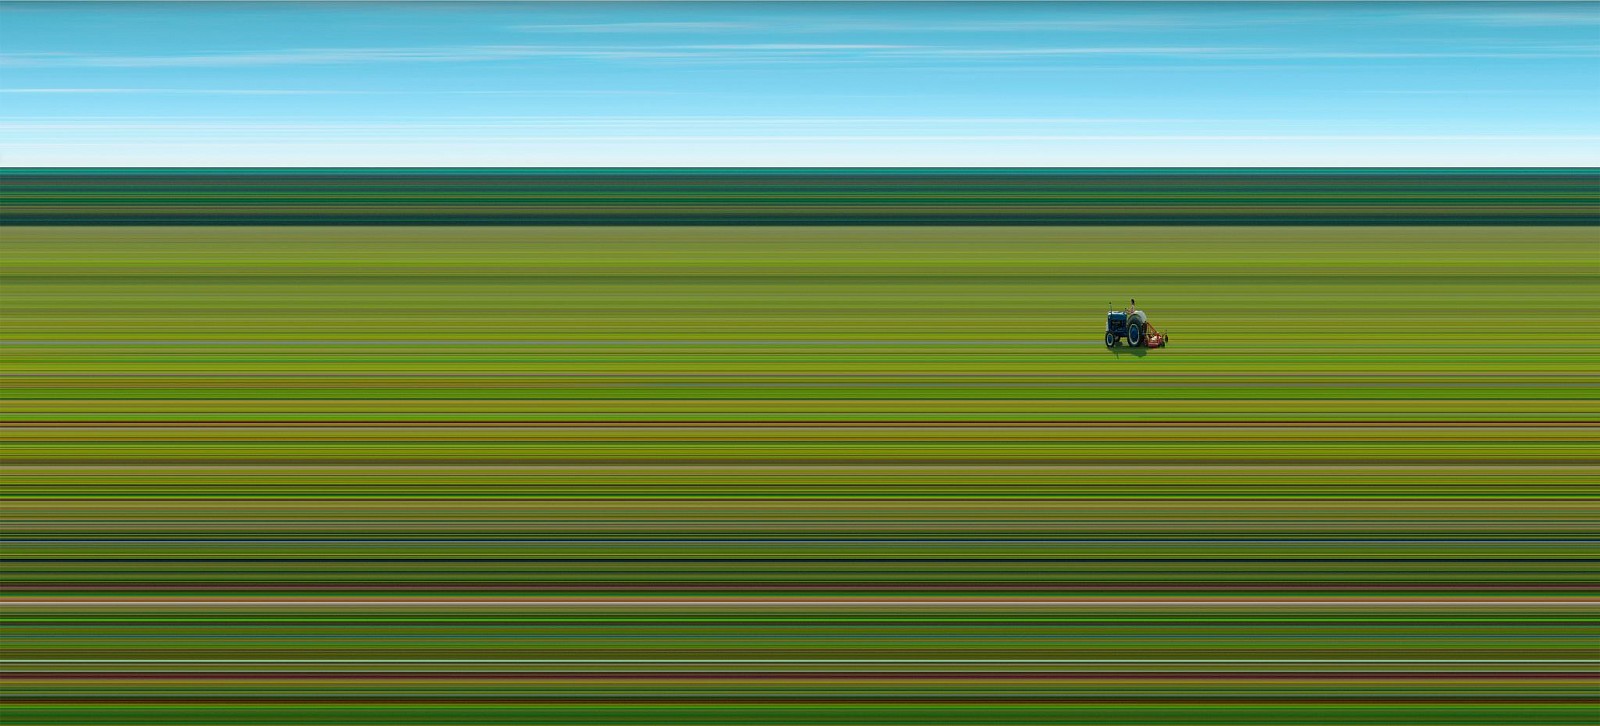 Jay Mark Johnson, MAGGIE ON TRACTOR, 2008 Brookville IN
archival pigment on paper, mounted on aluminum, 40 x 88 in. (101.6 x 223.5 cm)